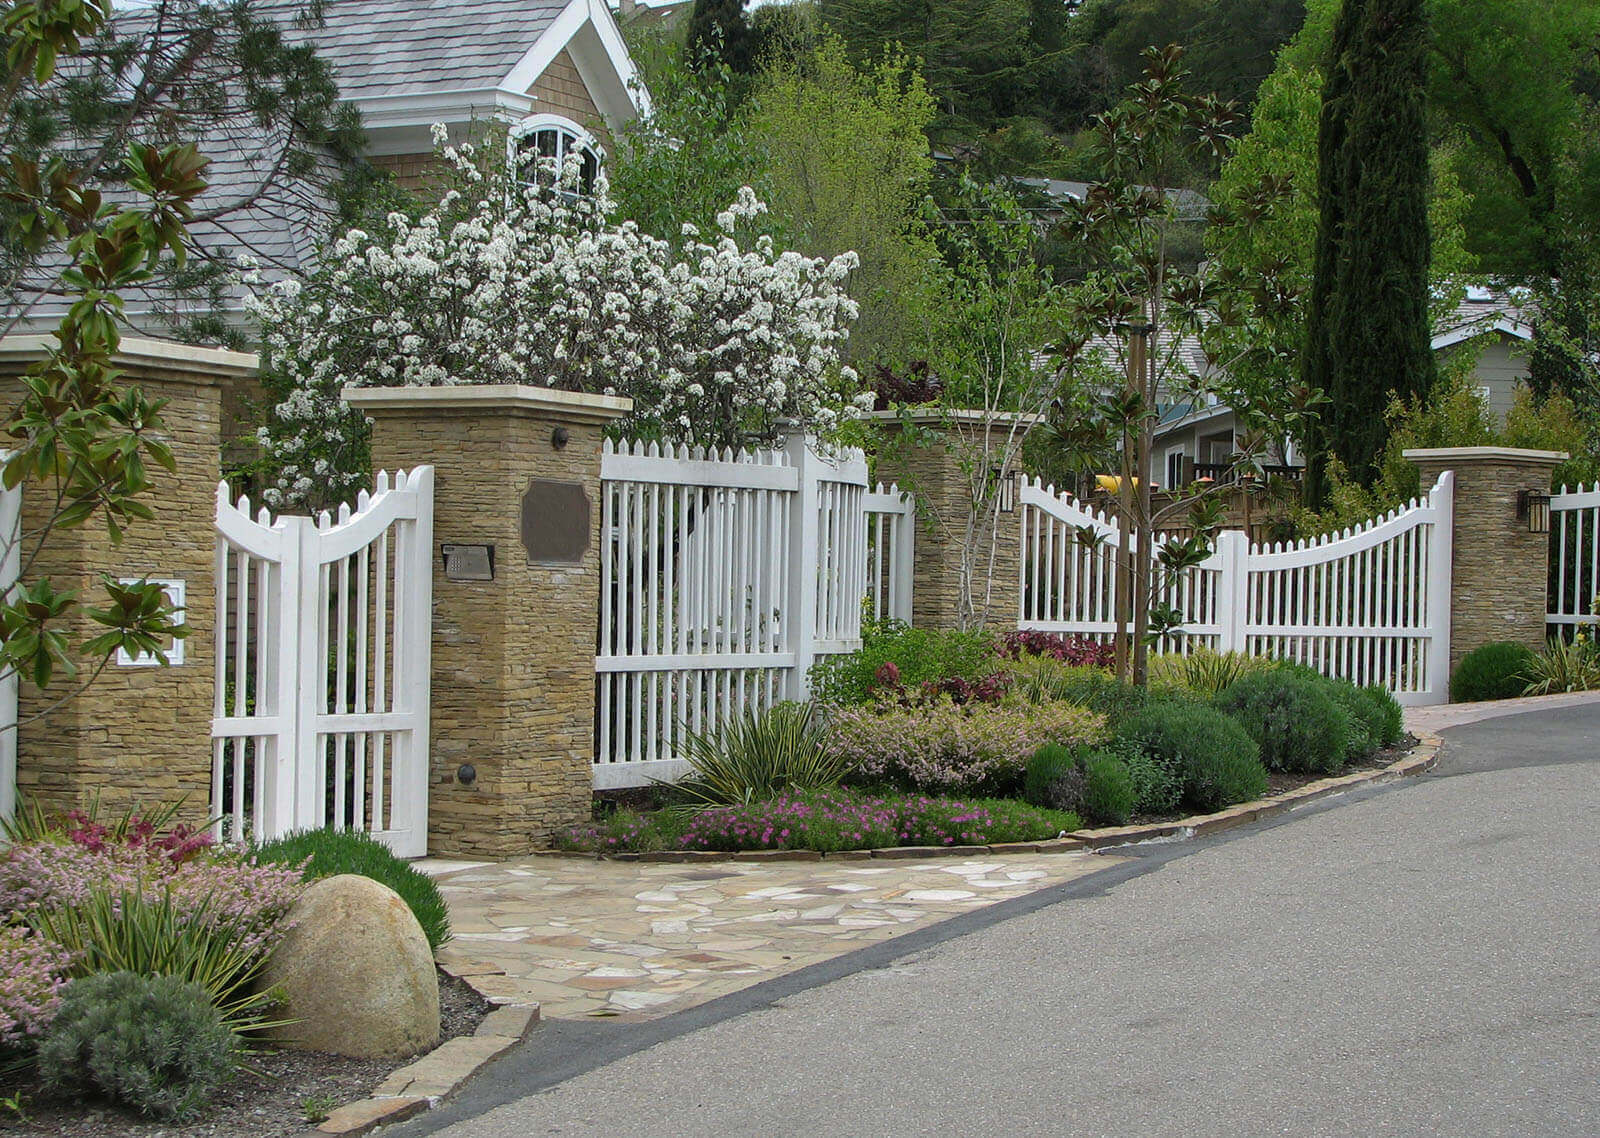 Tall scalloped fence with stone pillars and curb appeal planting